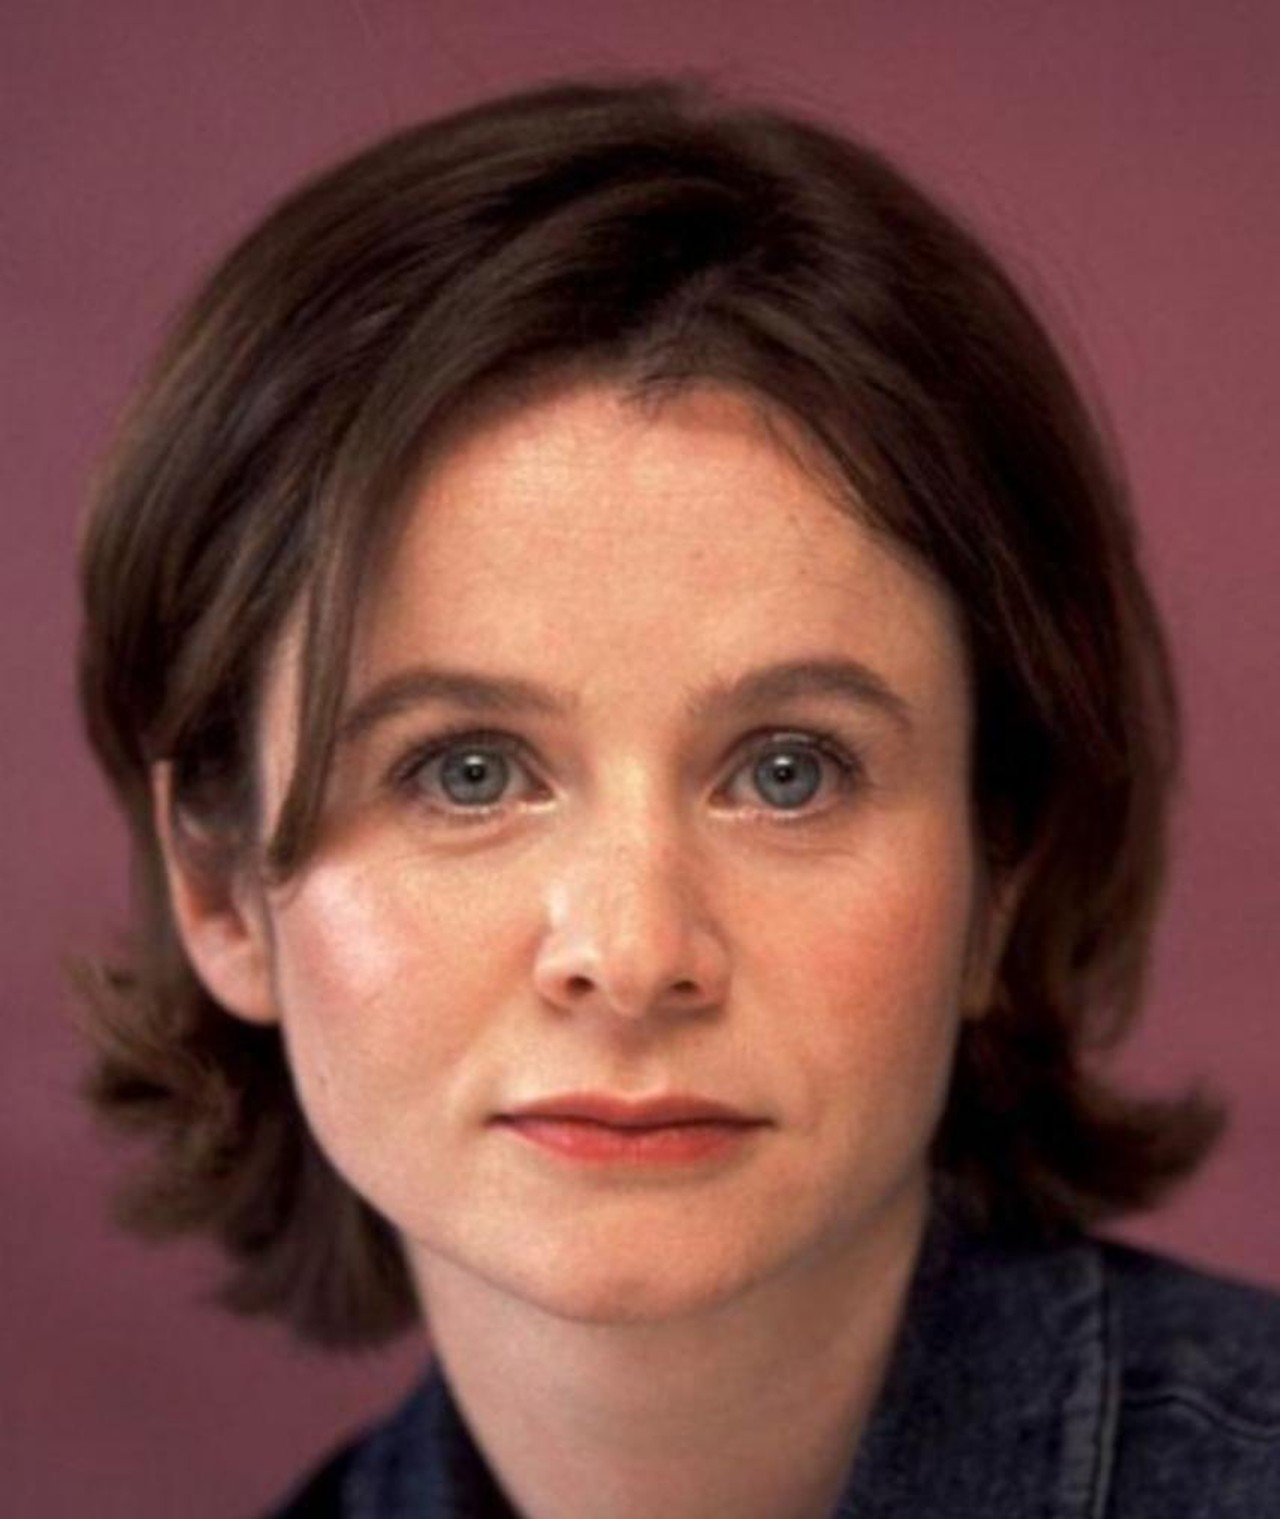 Emily watson pictures